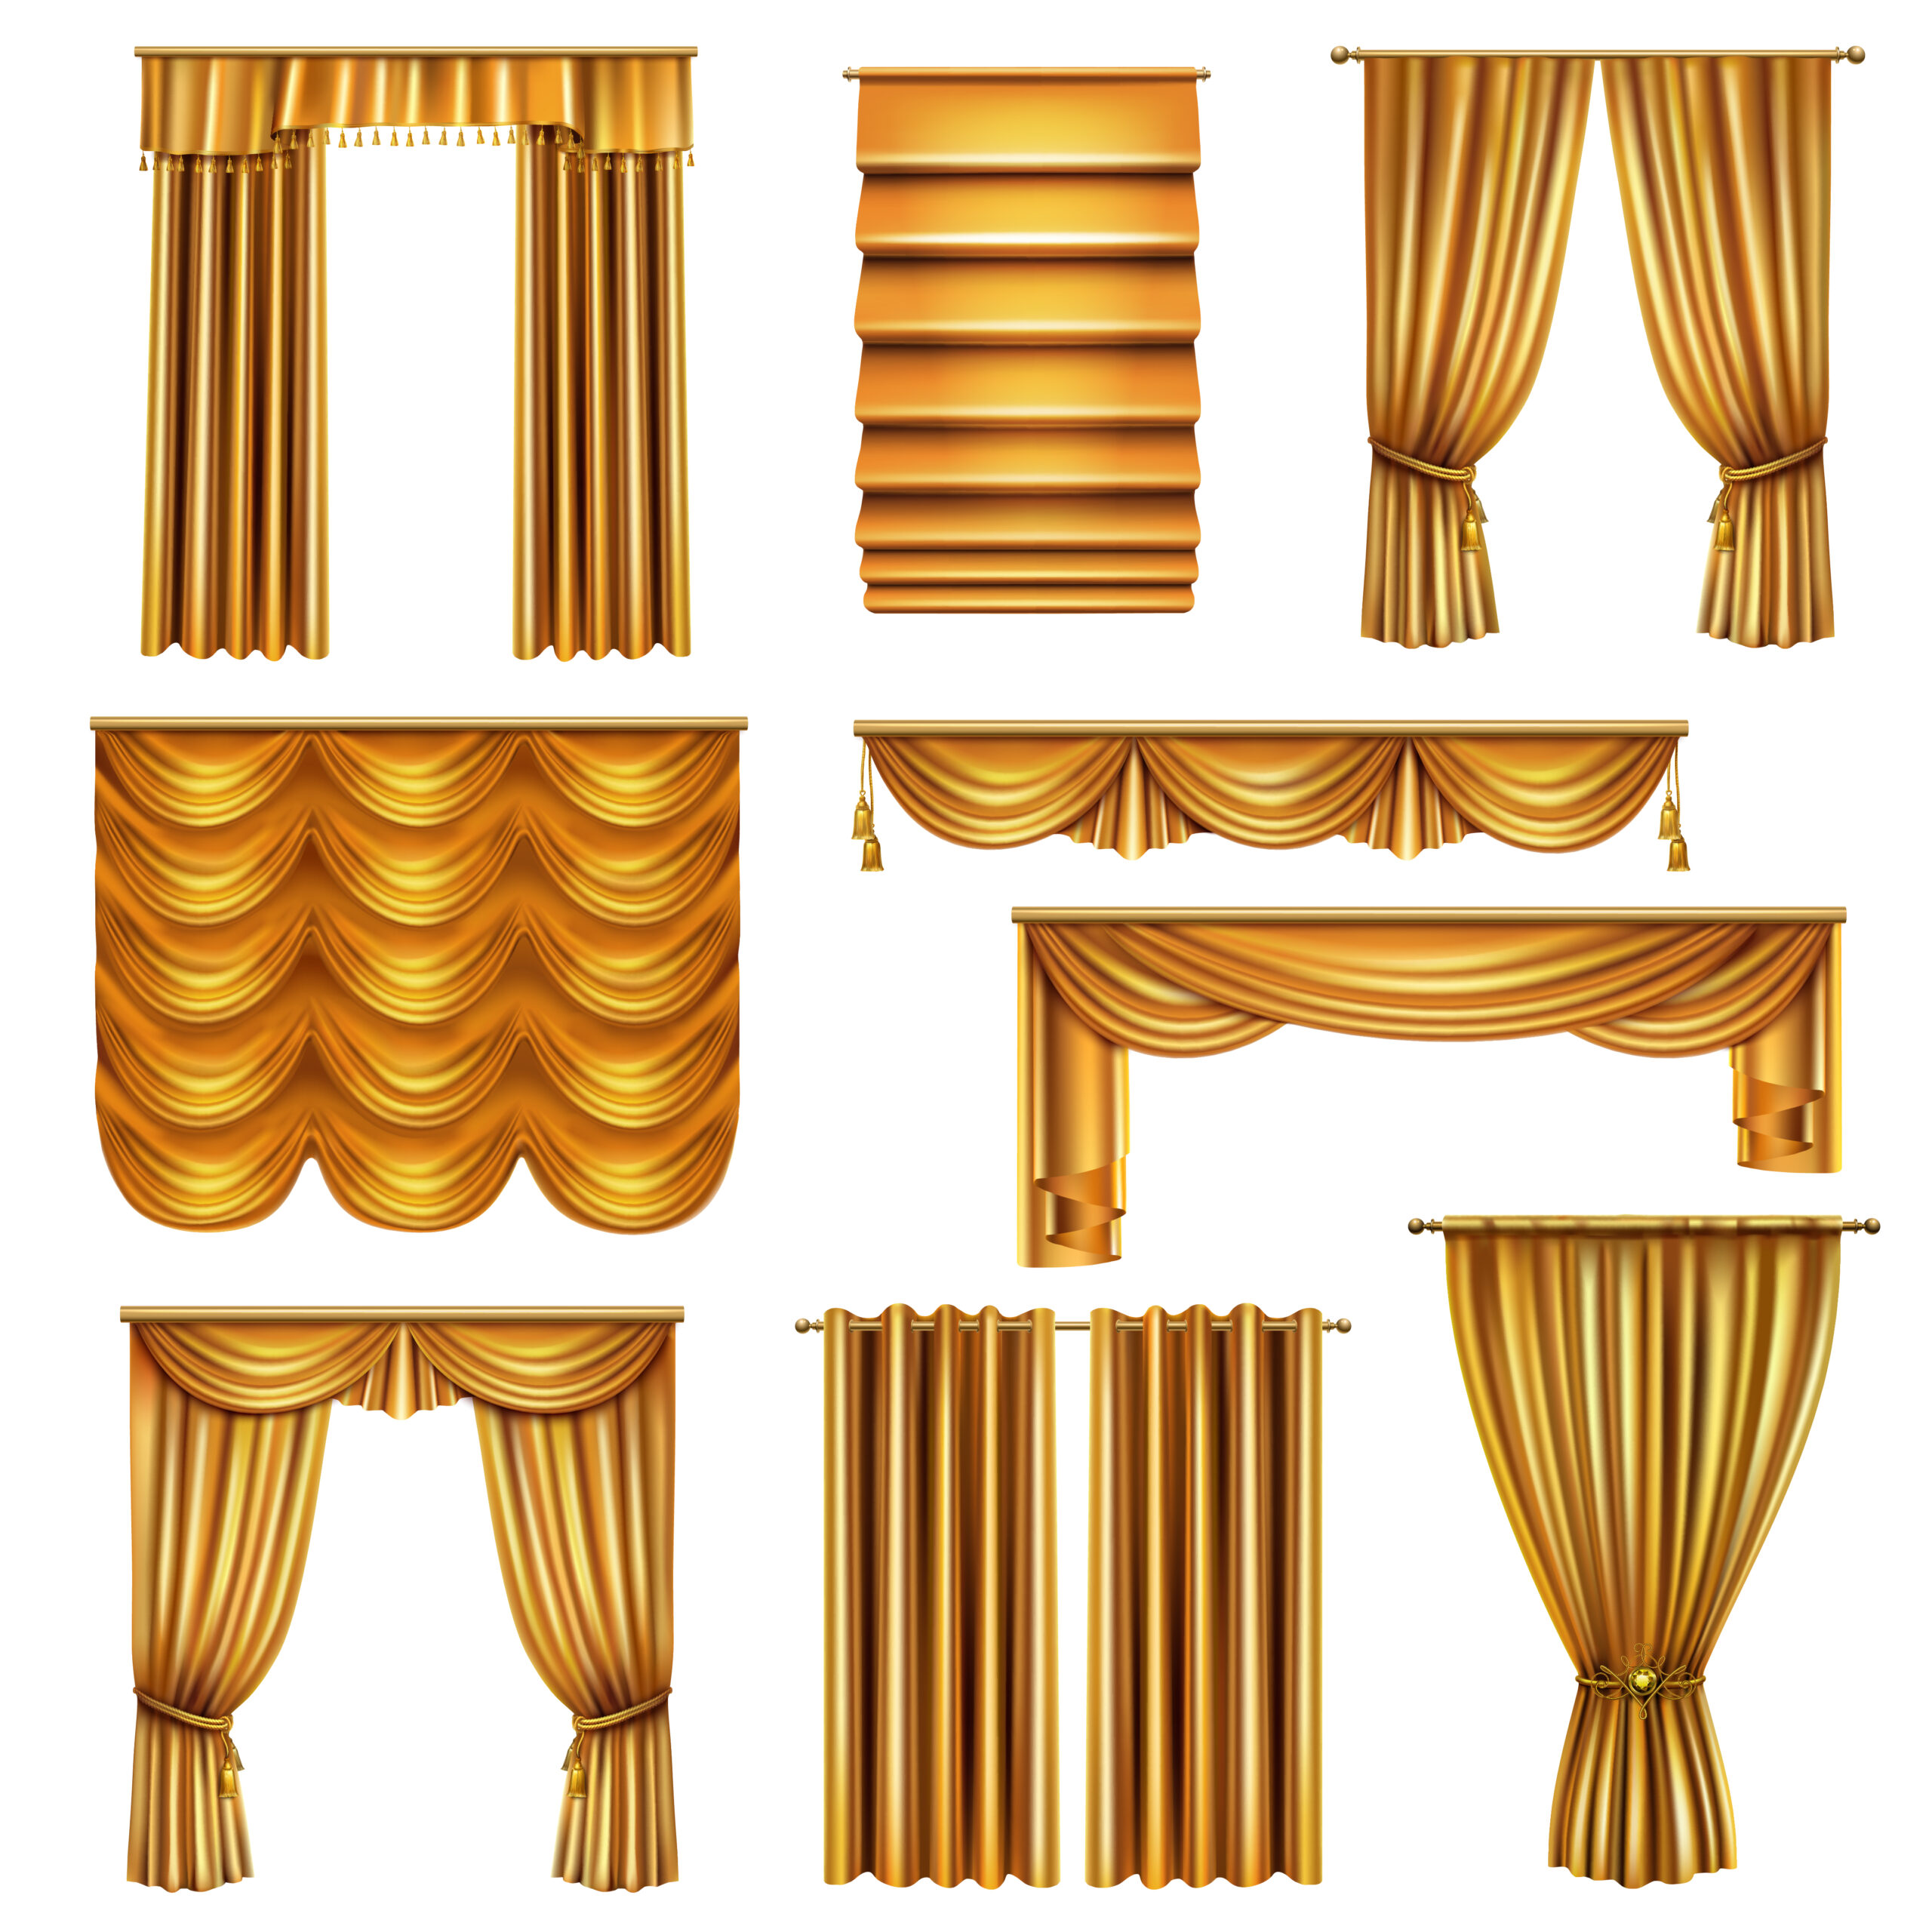 Top 15 Ideas for Gold Curtain Rods: A Detailed Guide